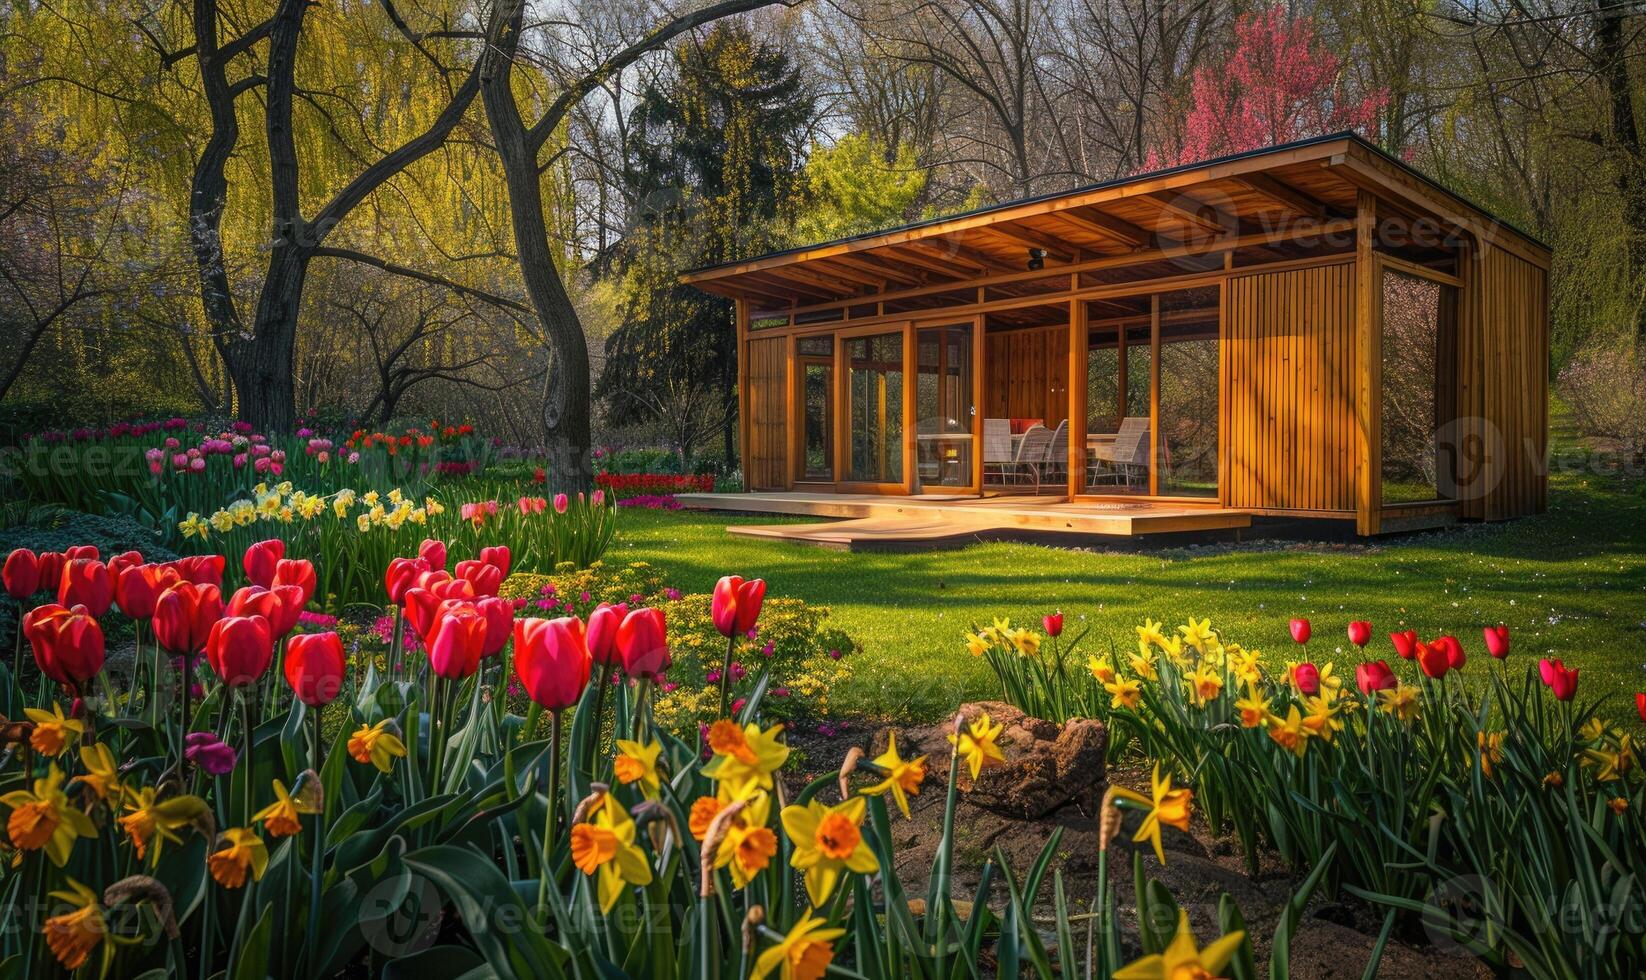 A modern wooden cabin surrounded by blooming tulips and daffodils in a vibrant spring garden photo